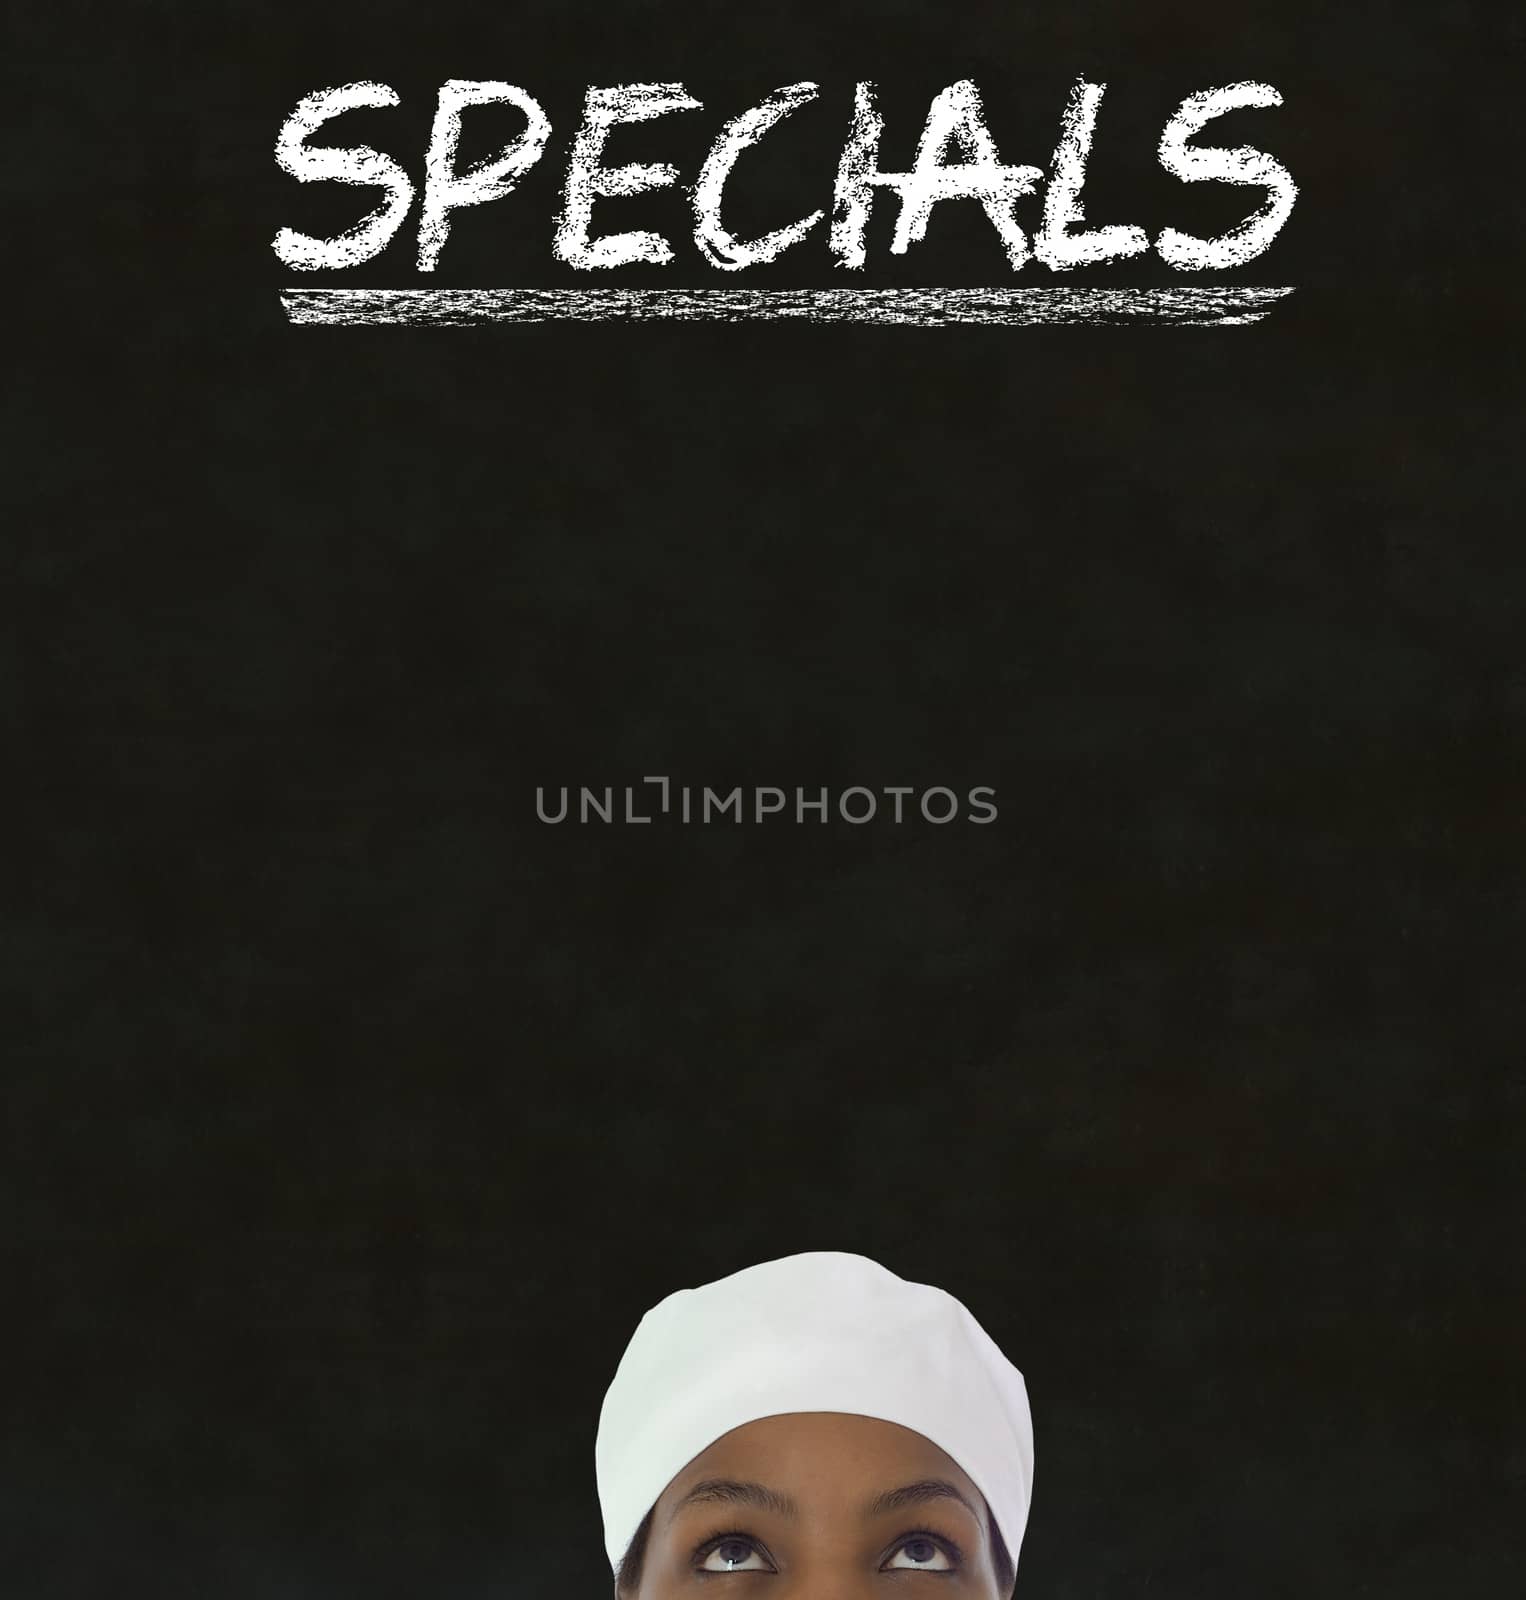 African American woman chef thinking with chalk specials sign on blackboard Background by alistaircotton